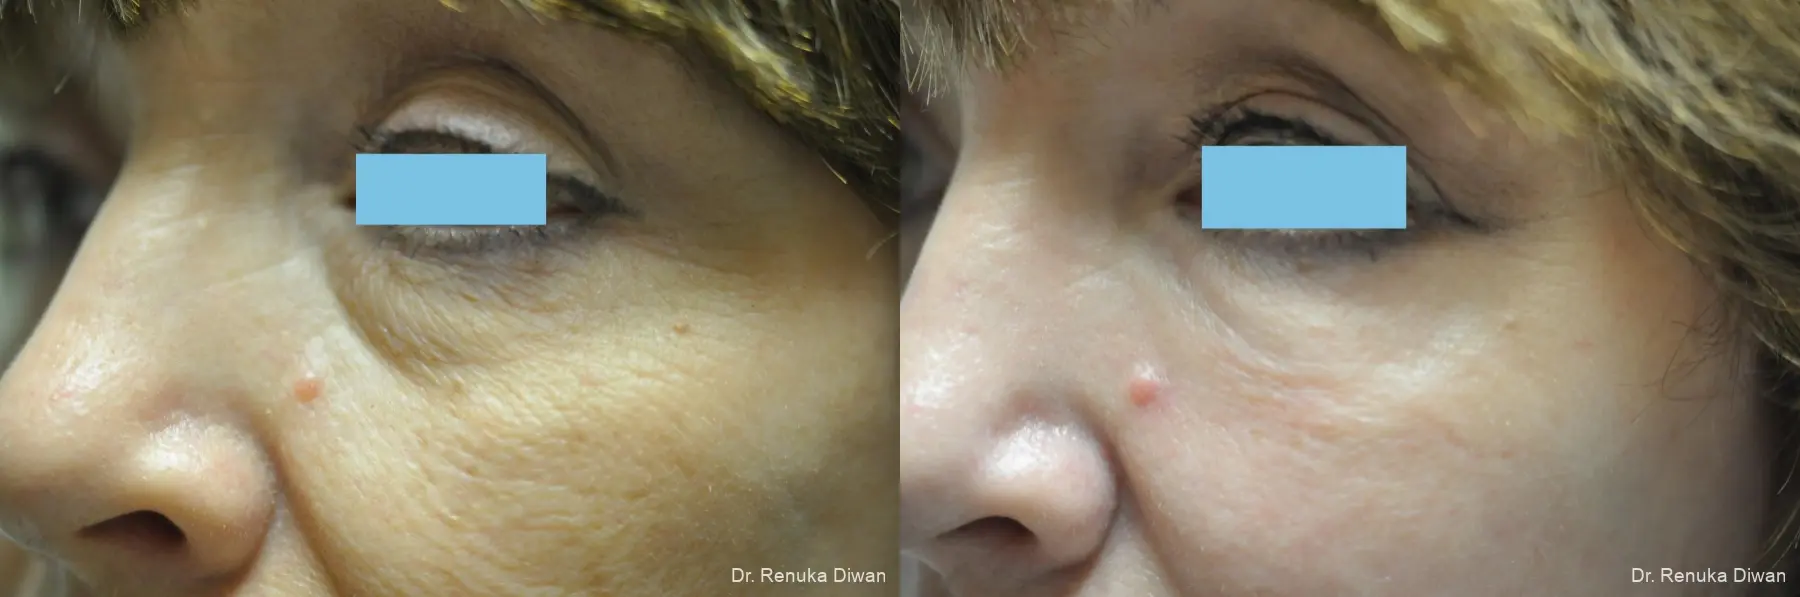 Laser Skin Resurfacing: Patient 13 - Before and After 1